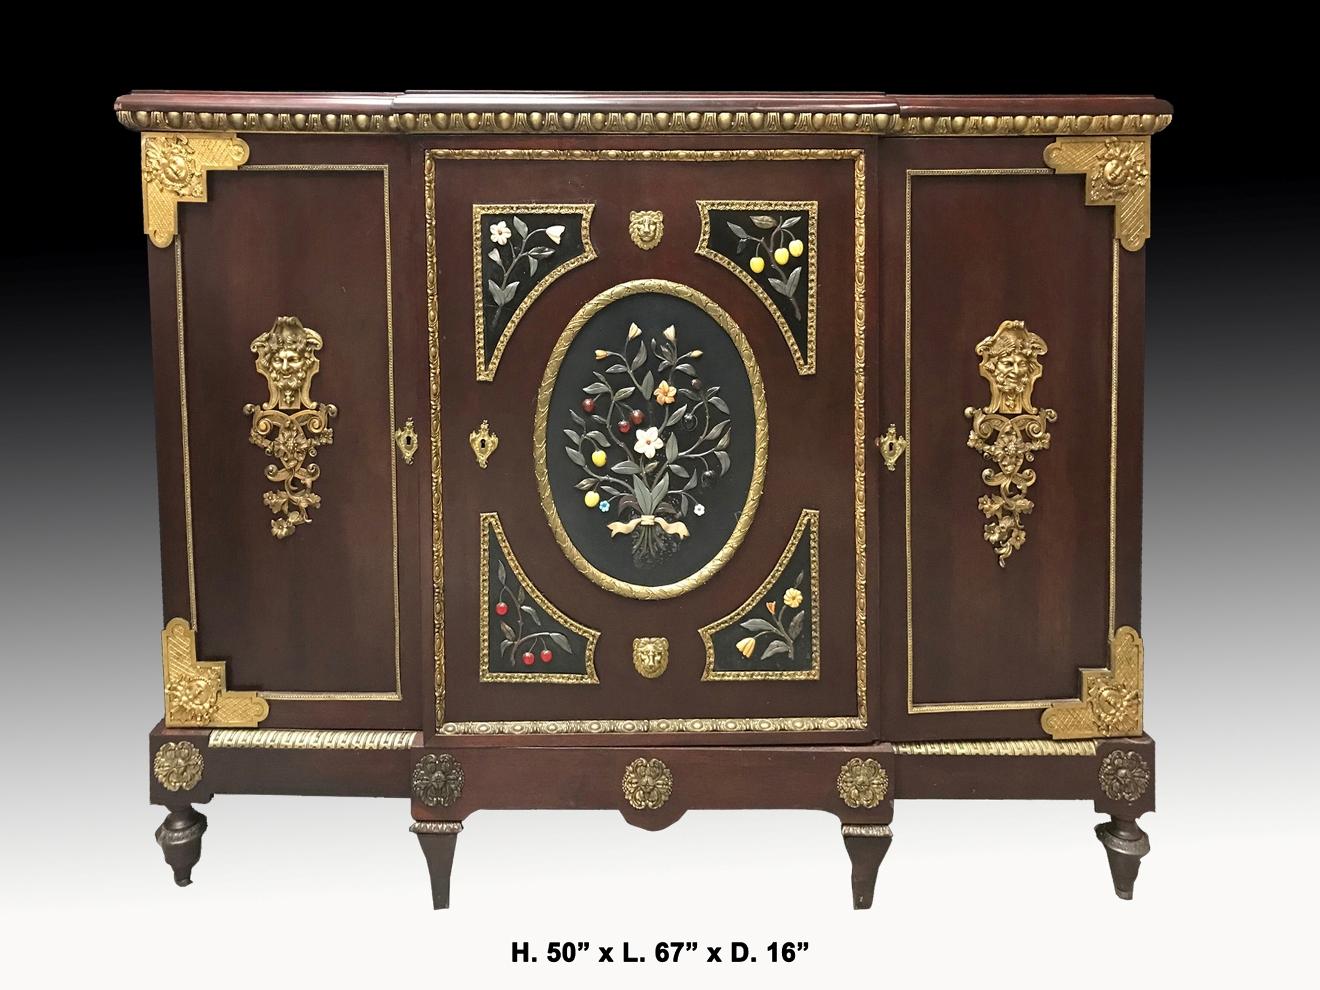 Exquisite French Napoleon III semi-precious stone Jeweled and ormolu-mounted three door cabinet.
19th century. 

Moulded breakfront wood top trimmed with gilt bronze egg and dart, above three doors revealing three shelving compartments and